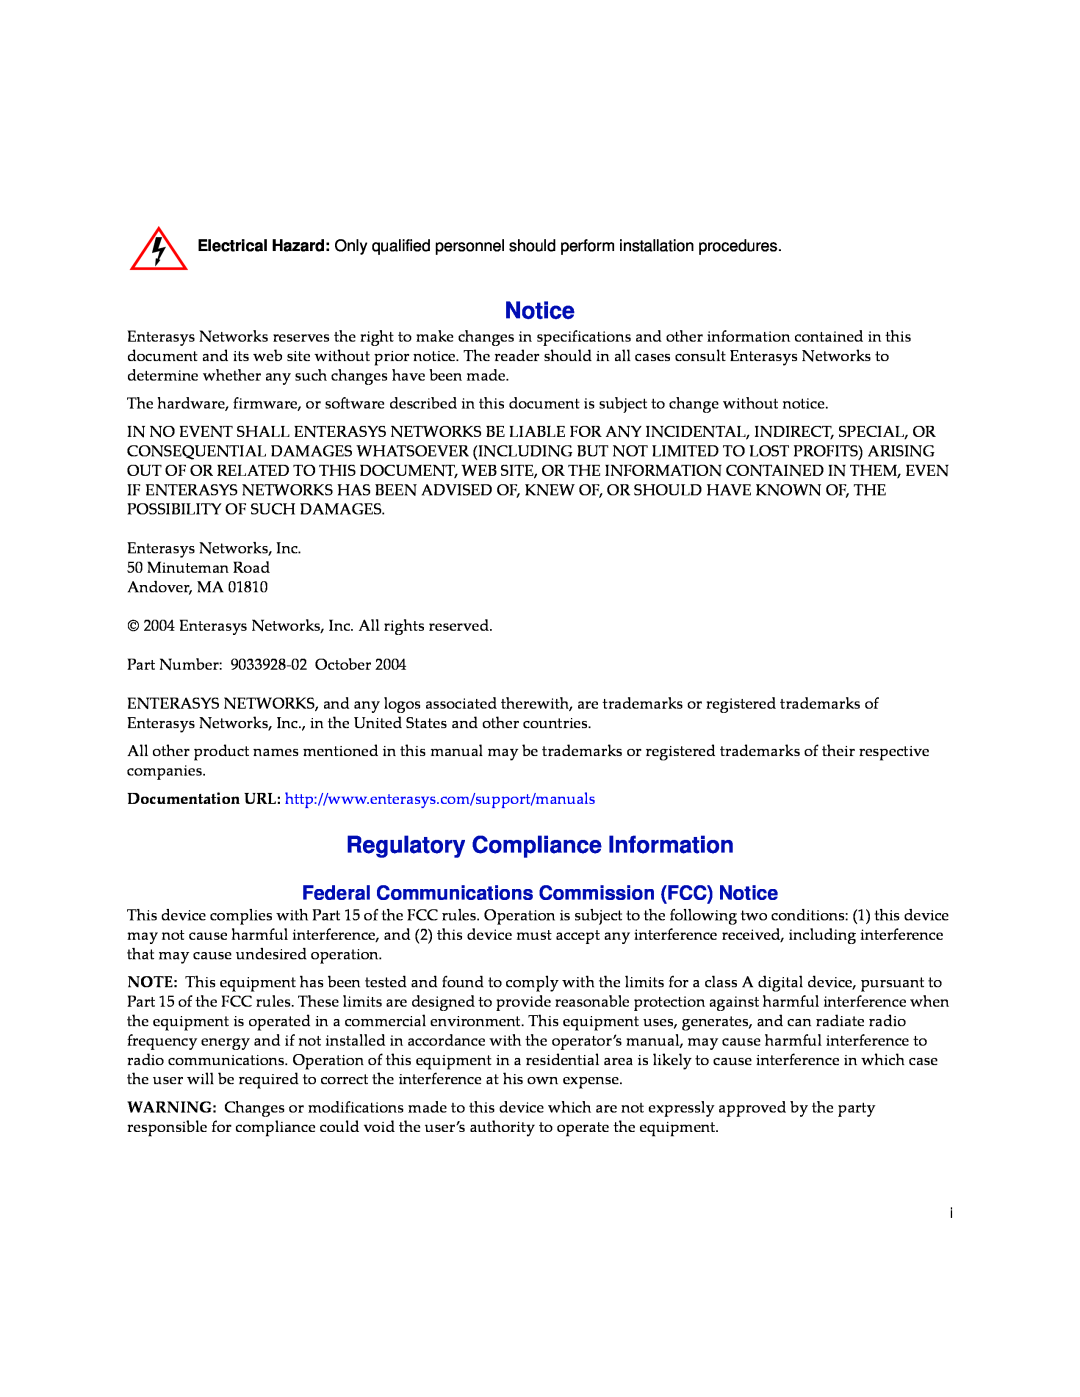 Enterasys Networks BL-89420ENT manual Regulatory Compliance Information, Federal Communications Commission FCC Notice 